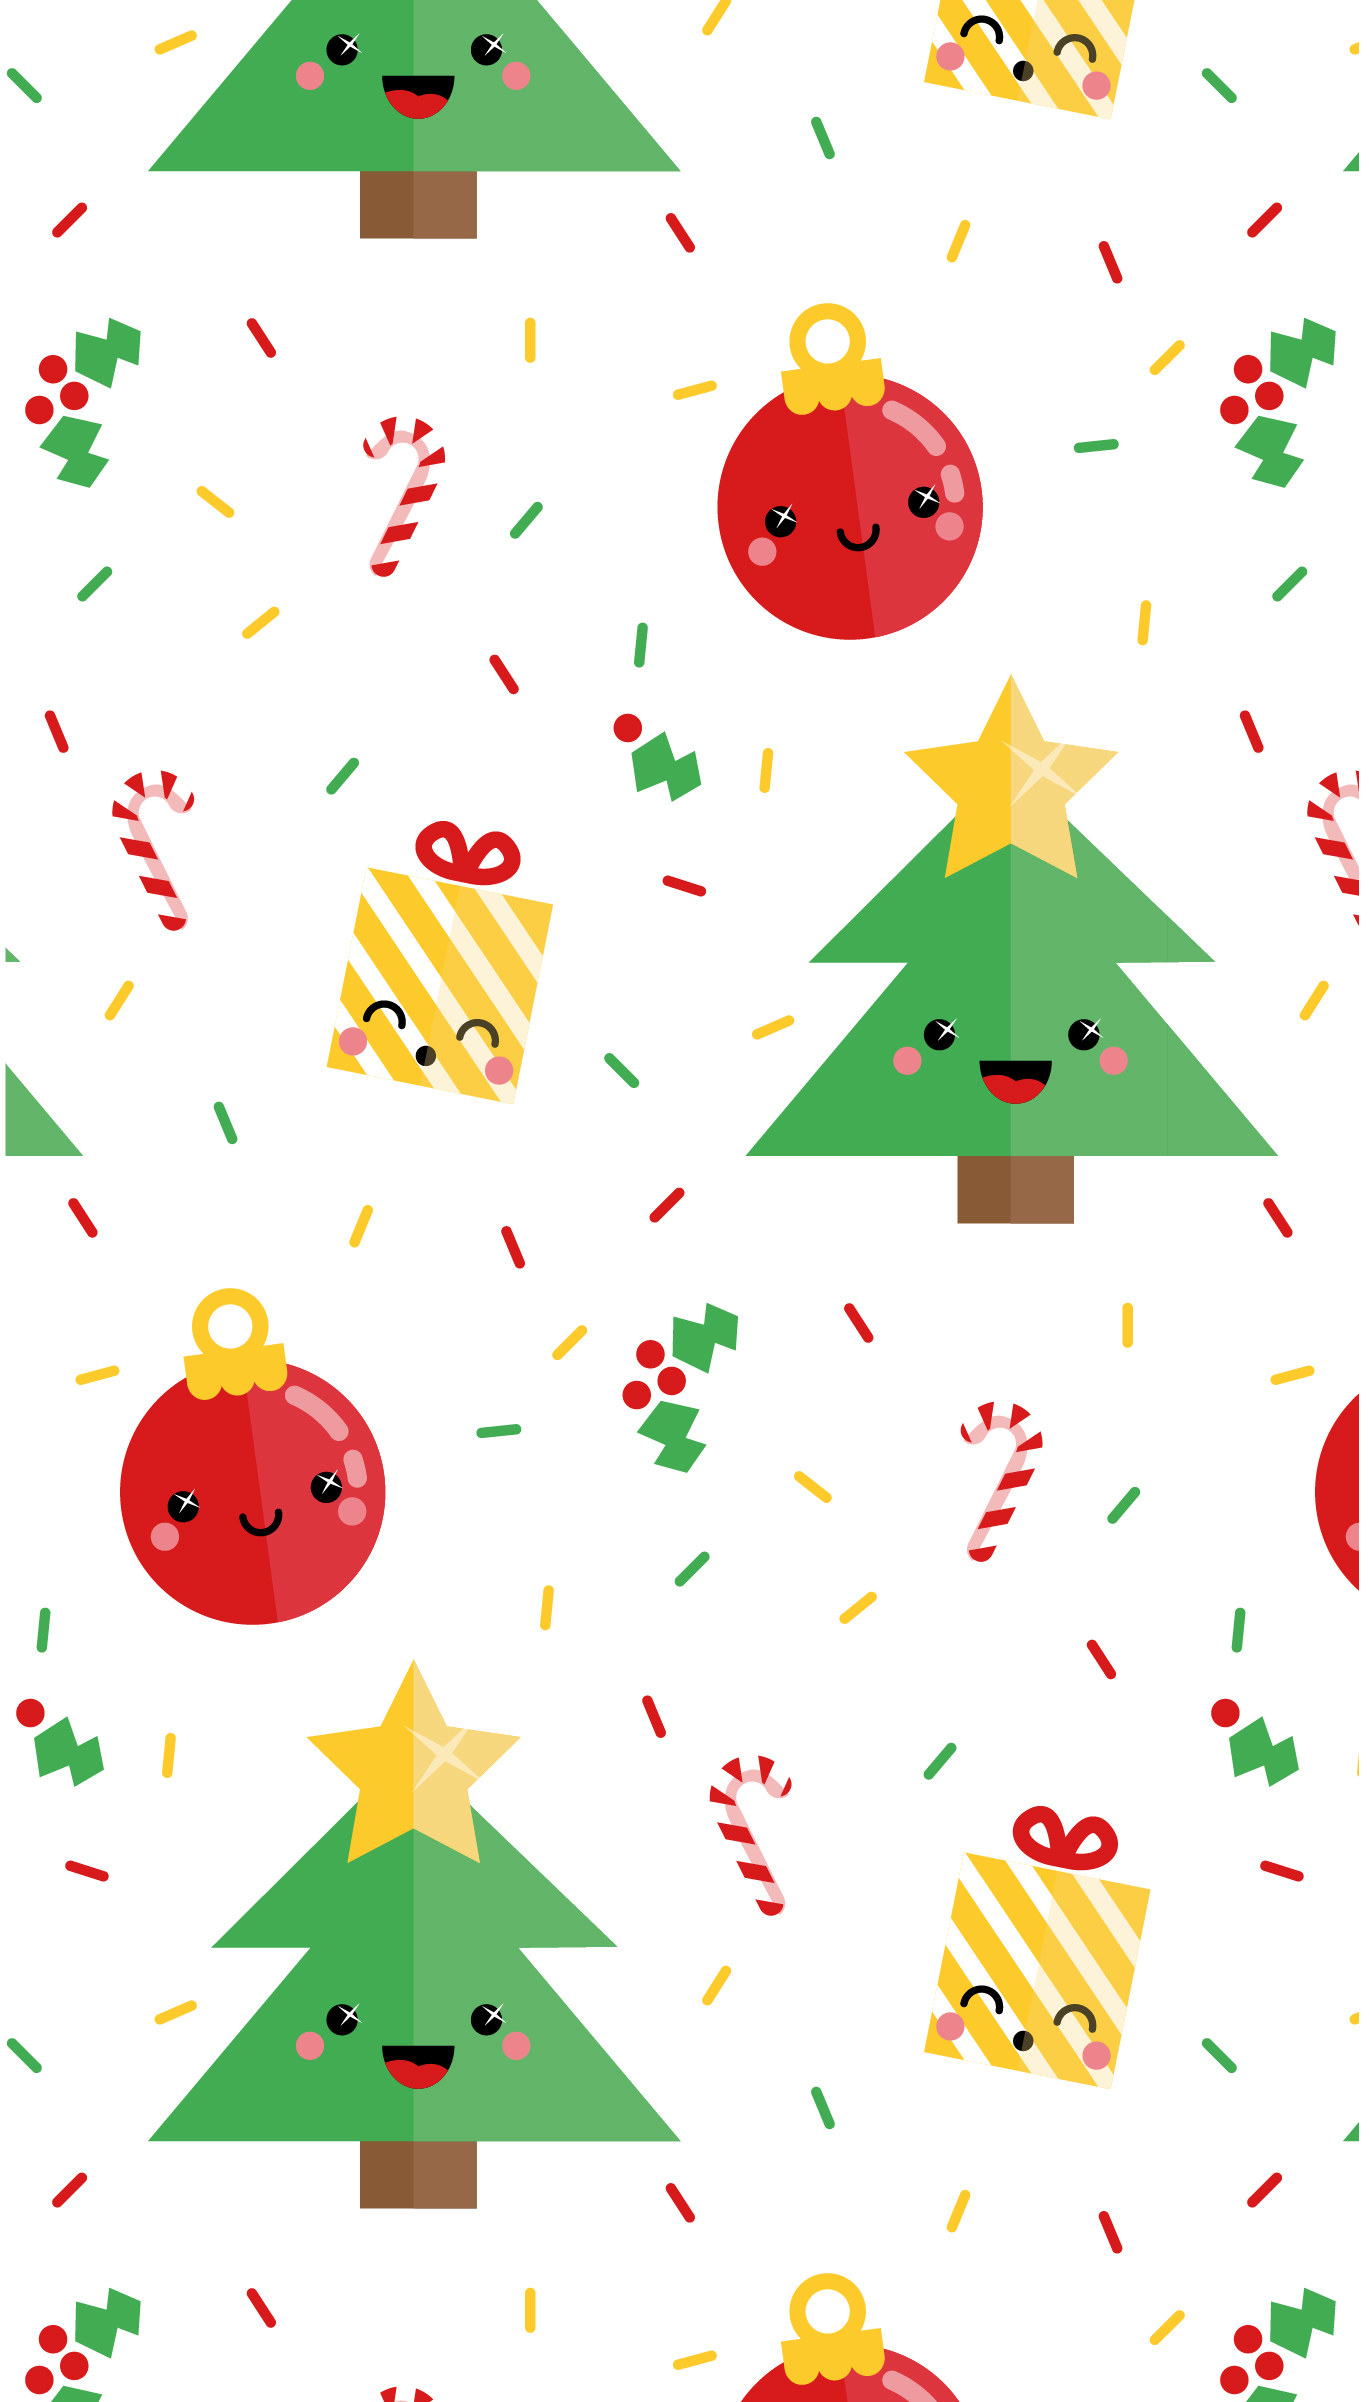 Holiday Backgrounds for your Phone and Desktop